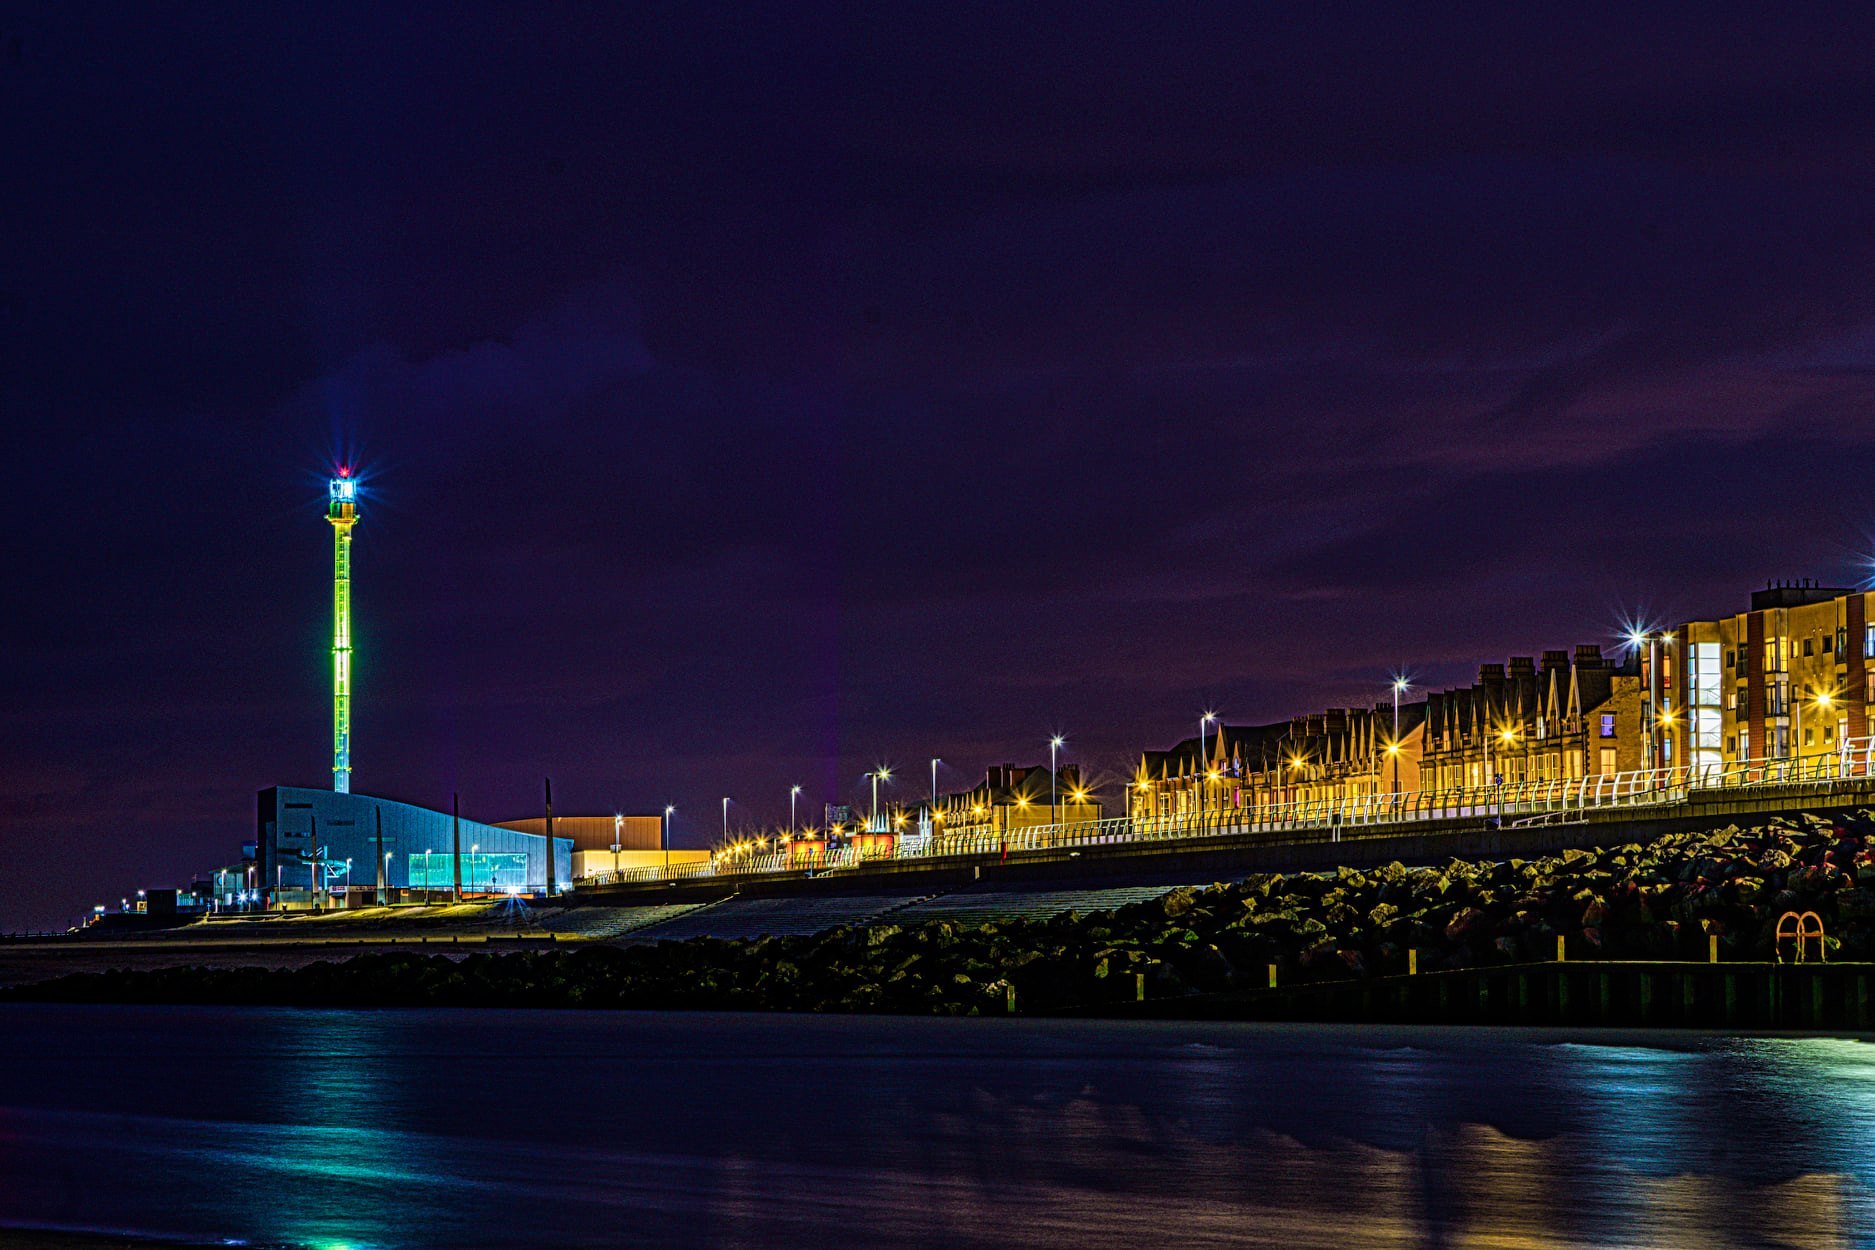 Rhyl Journal Camera Club member shares this stunning photograph of Rhyl prom lit up and the Sky Tower